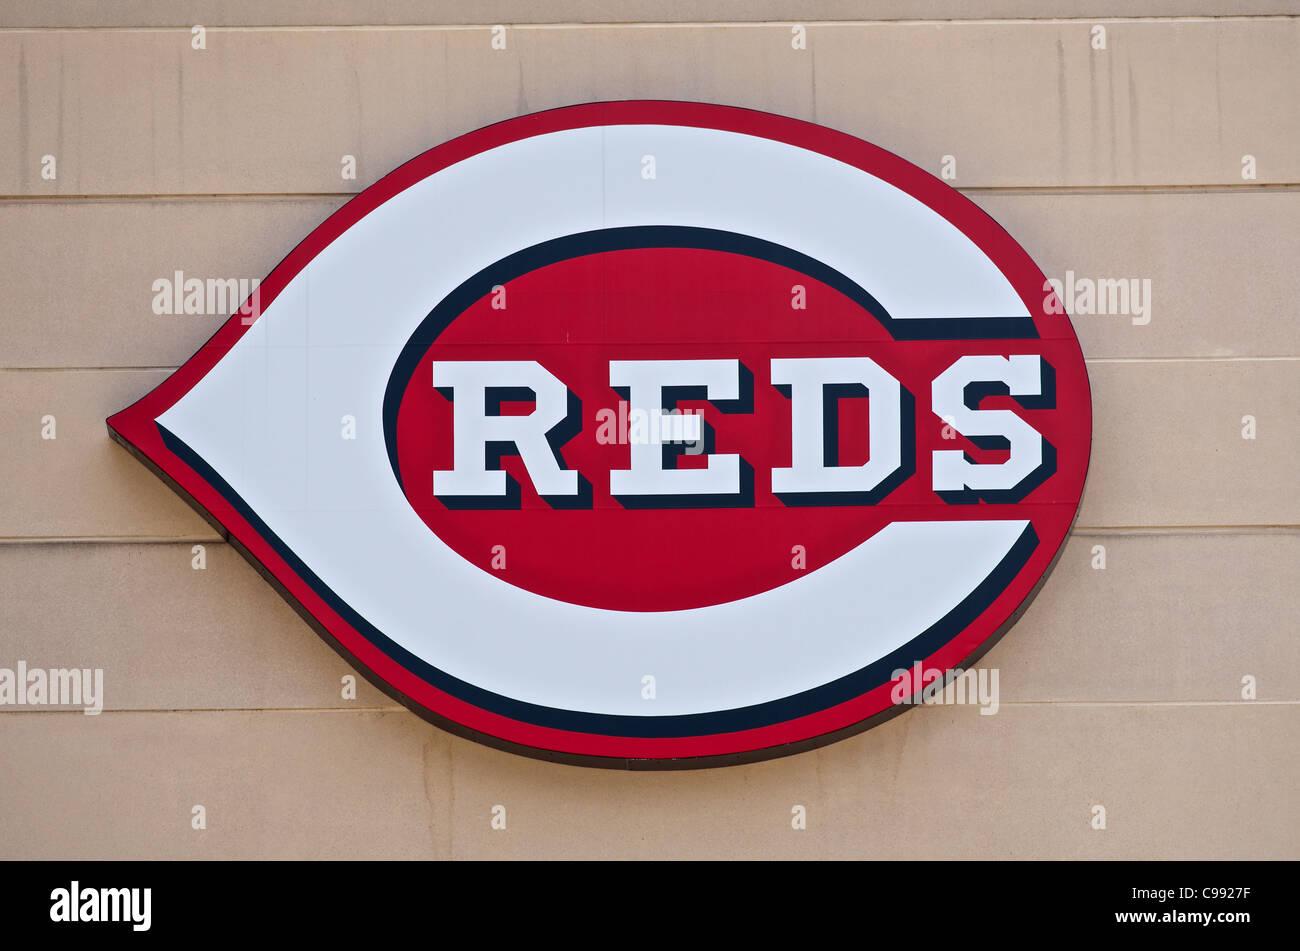 Reds sign on the Great American Ball Park in Cincinnati, Ohio Stock Photo